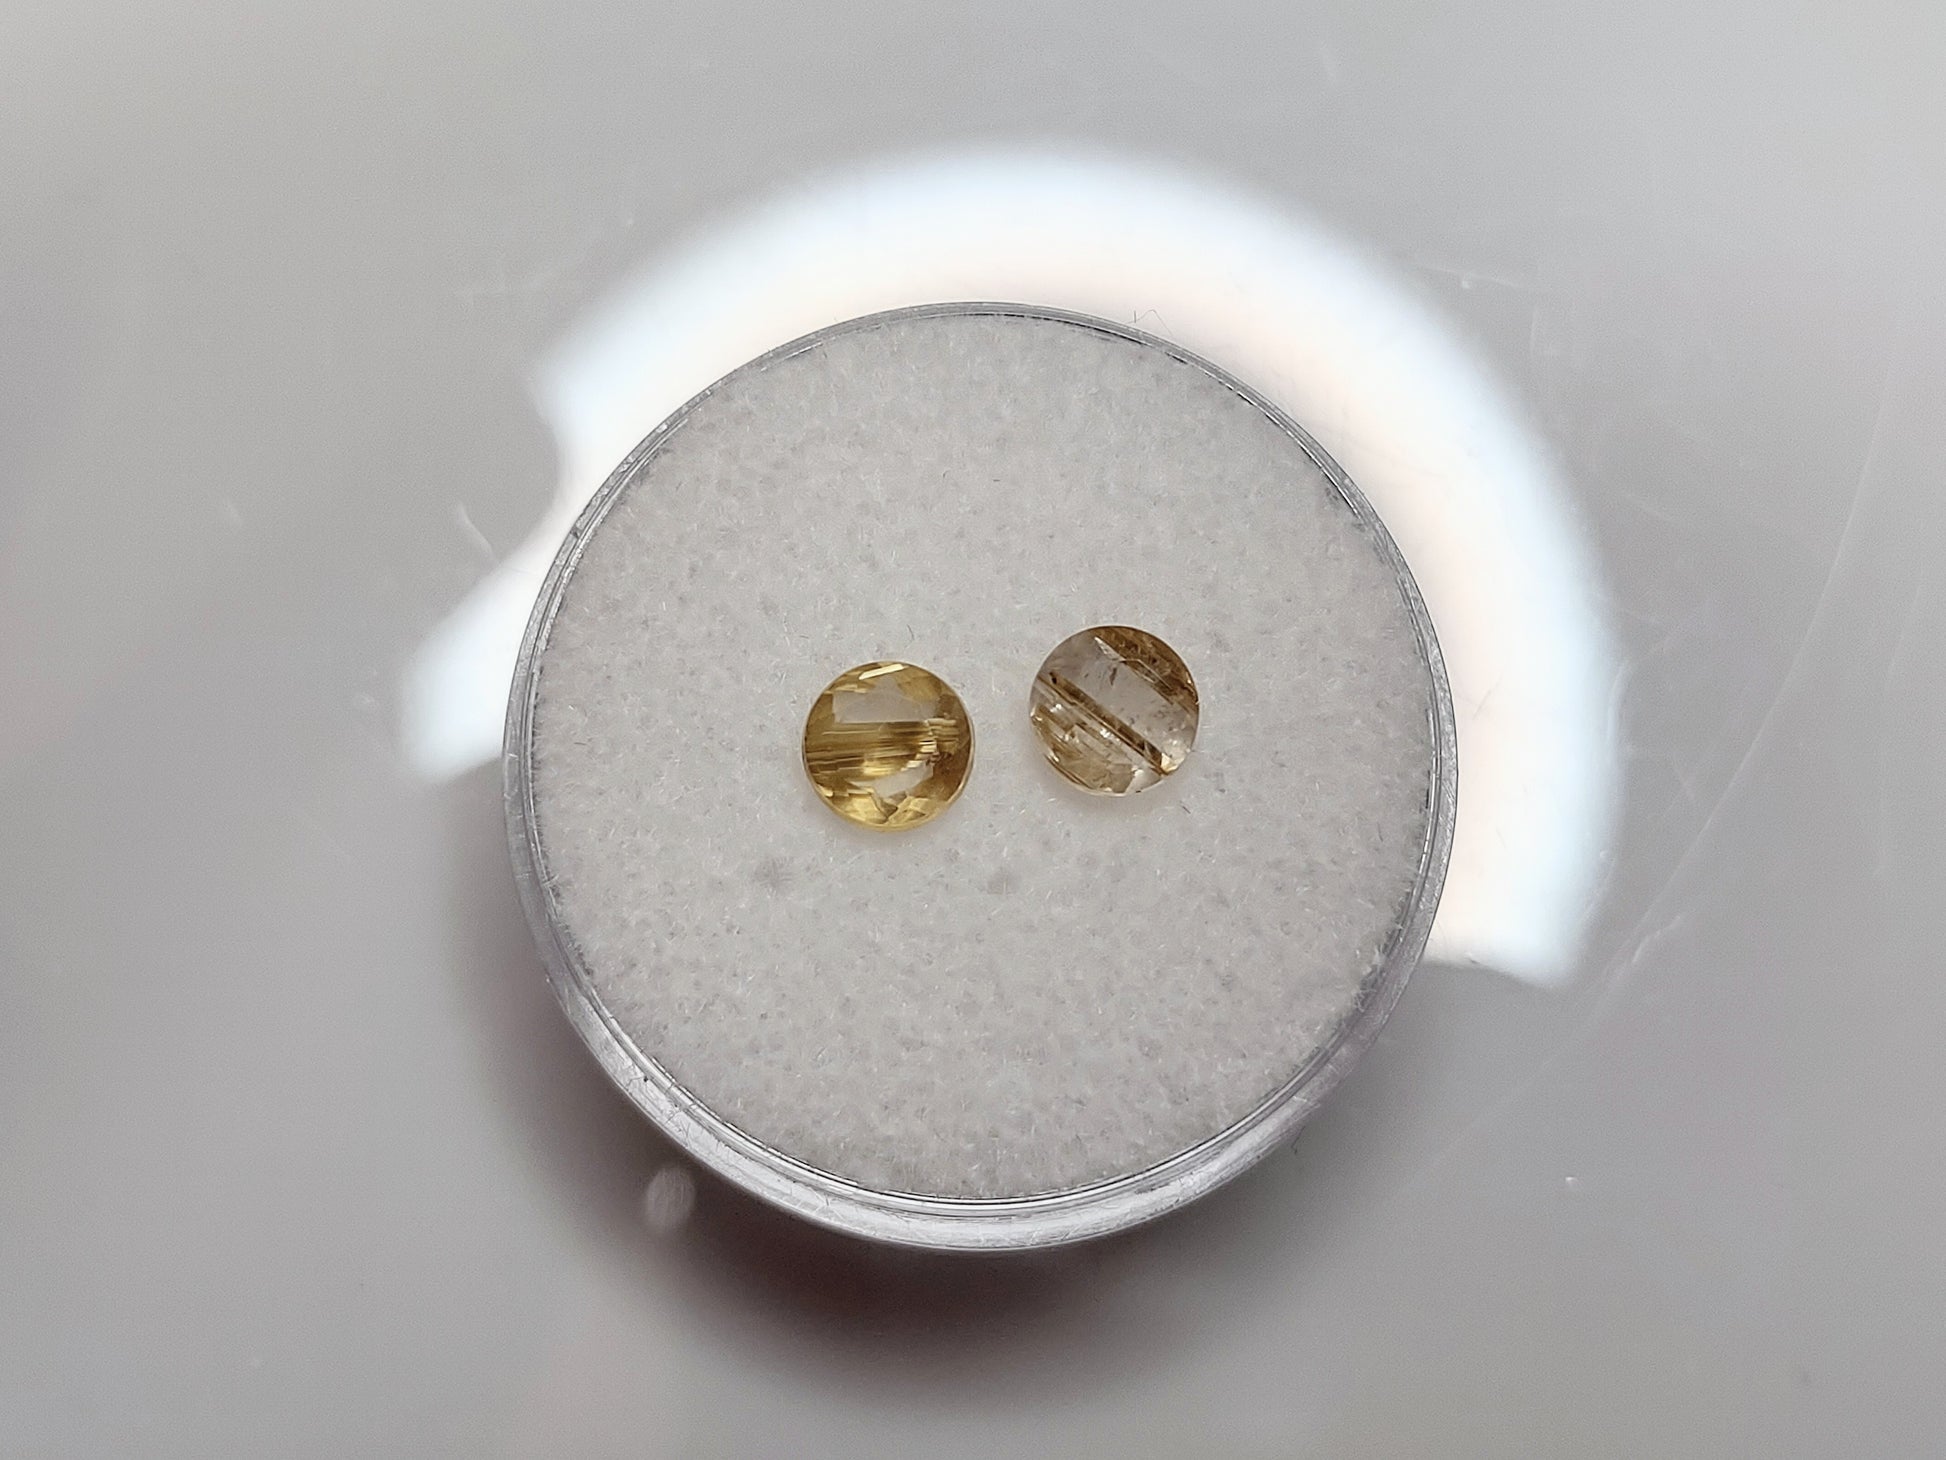 Two small clear quartz stones with golden stripes in it.